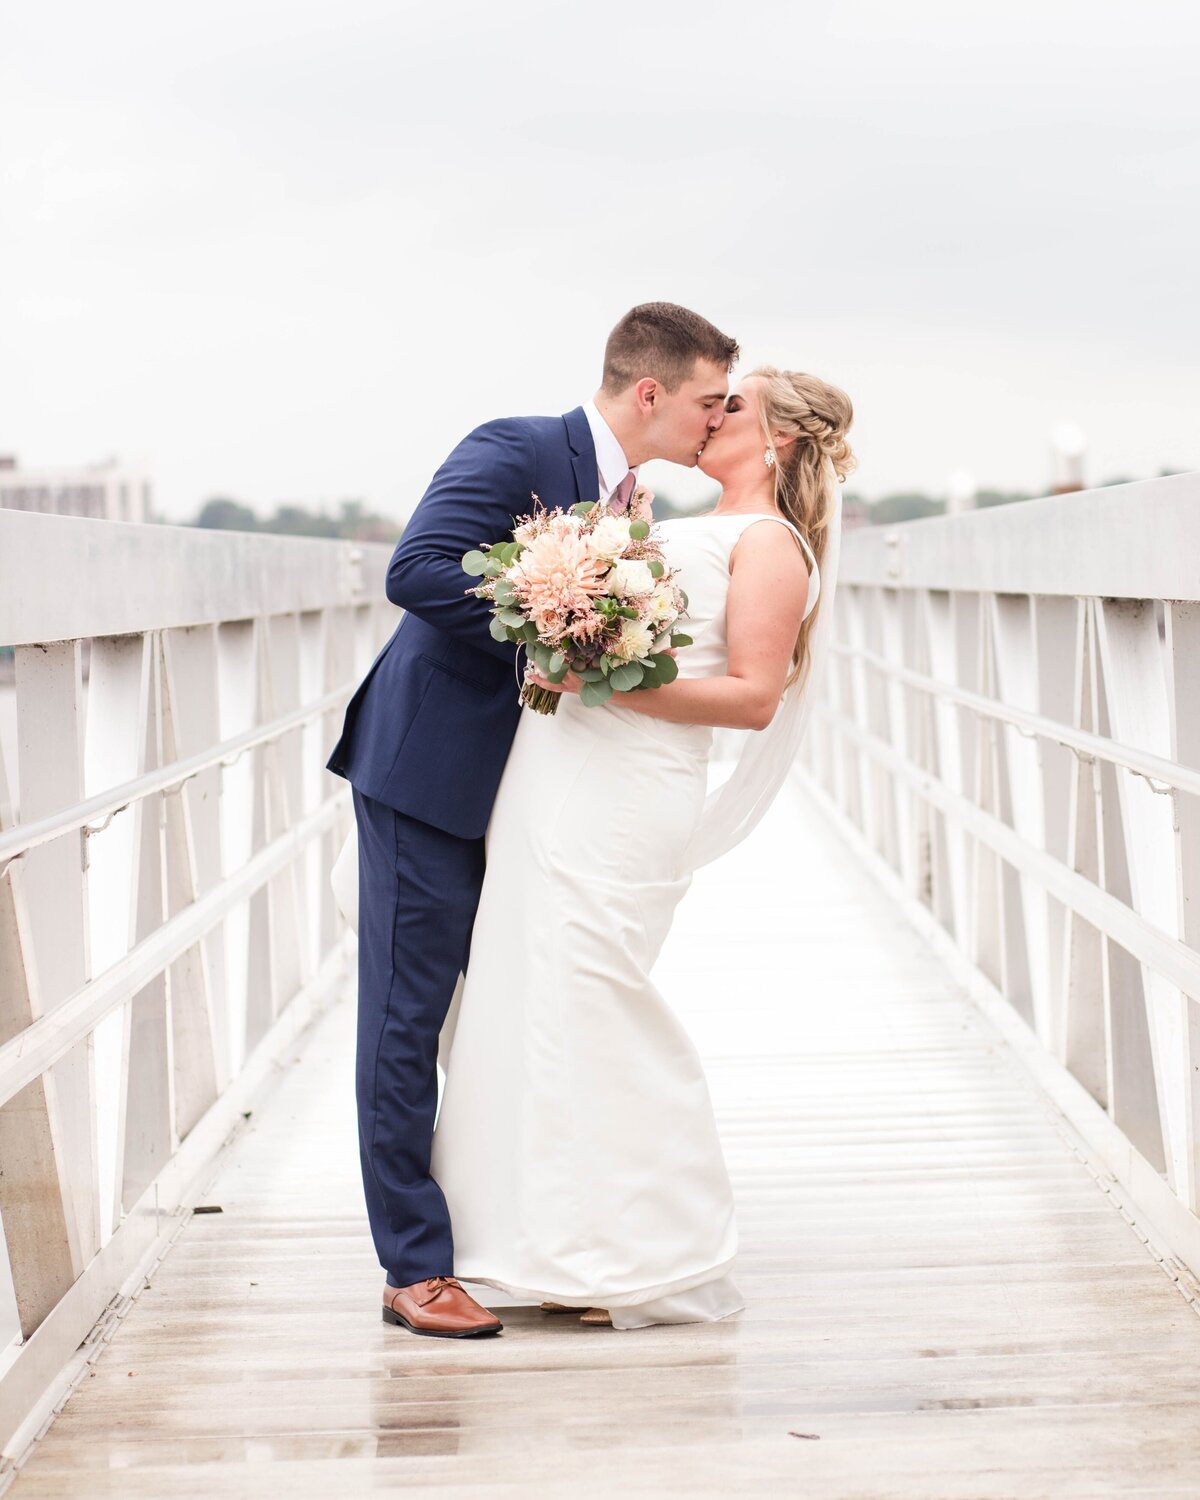 bright and airy wedding photographer in illionis